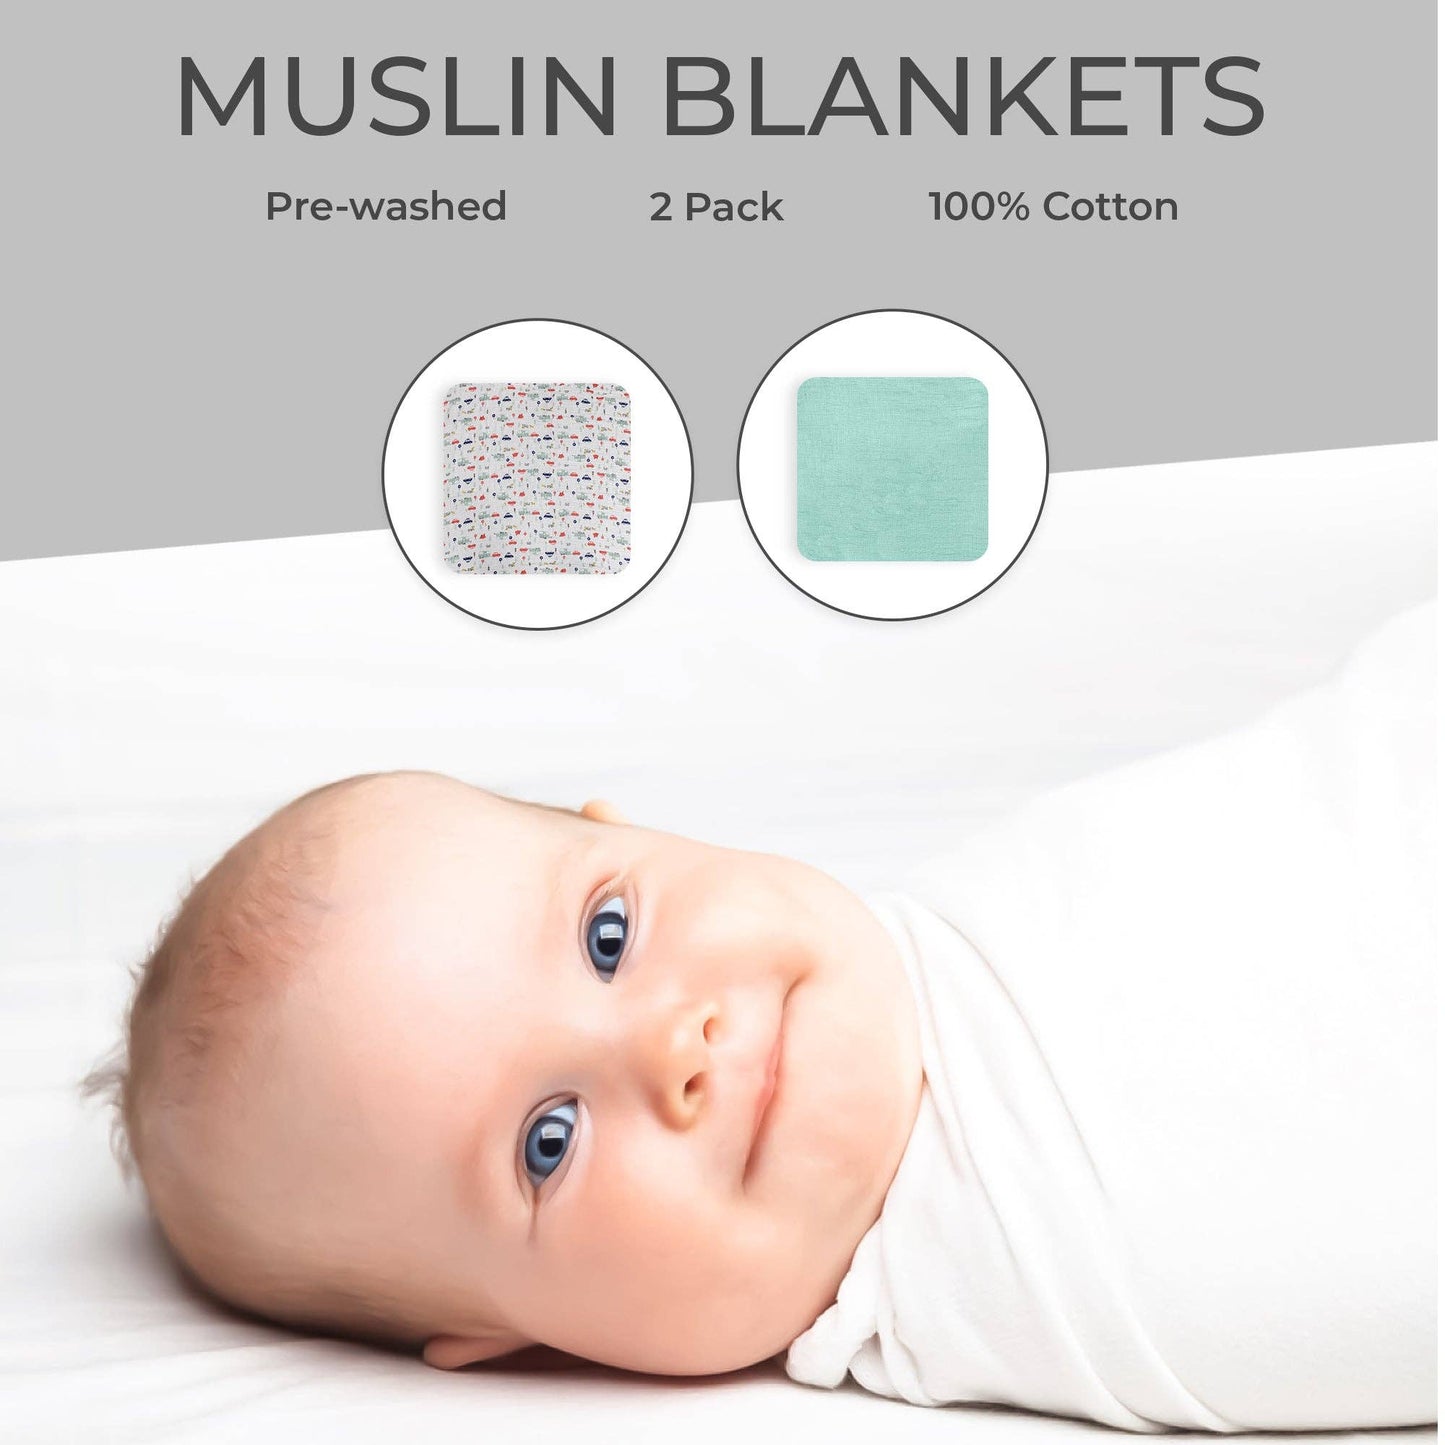 2 Pack Muslin Swaddle Blankets - Camping